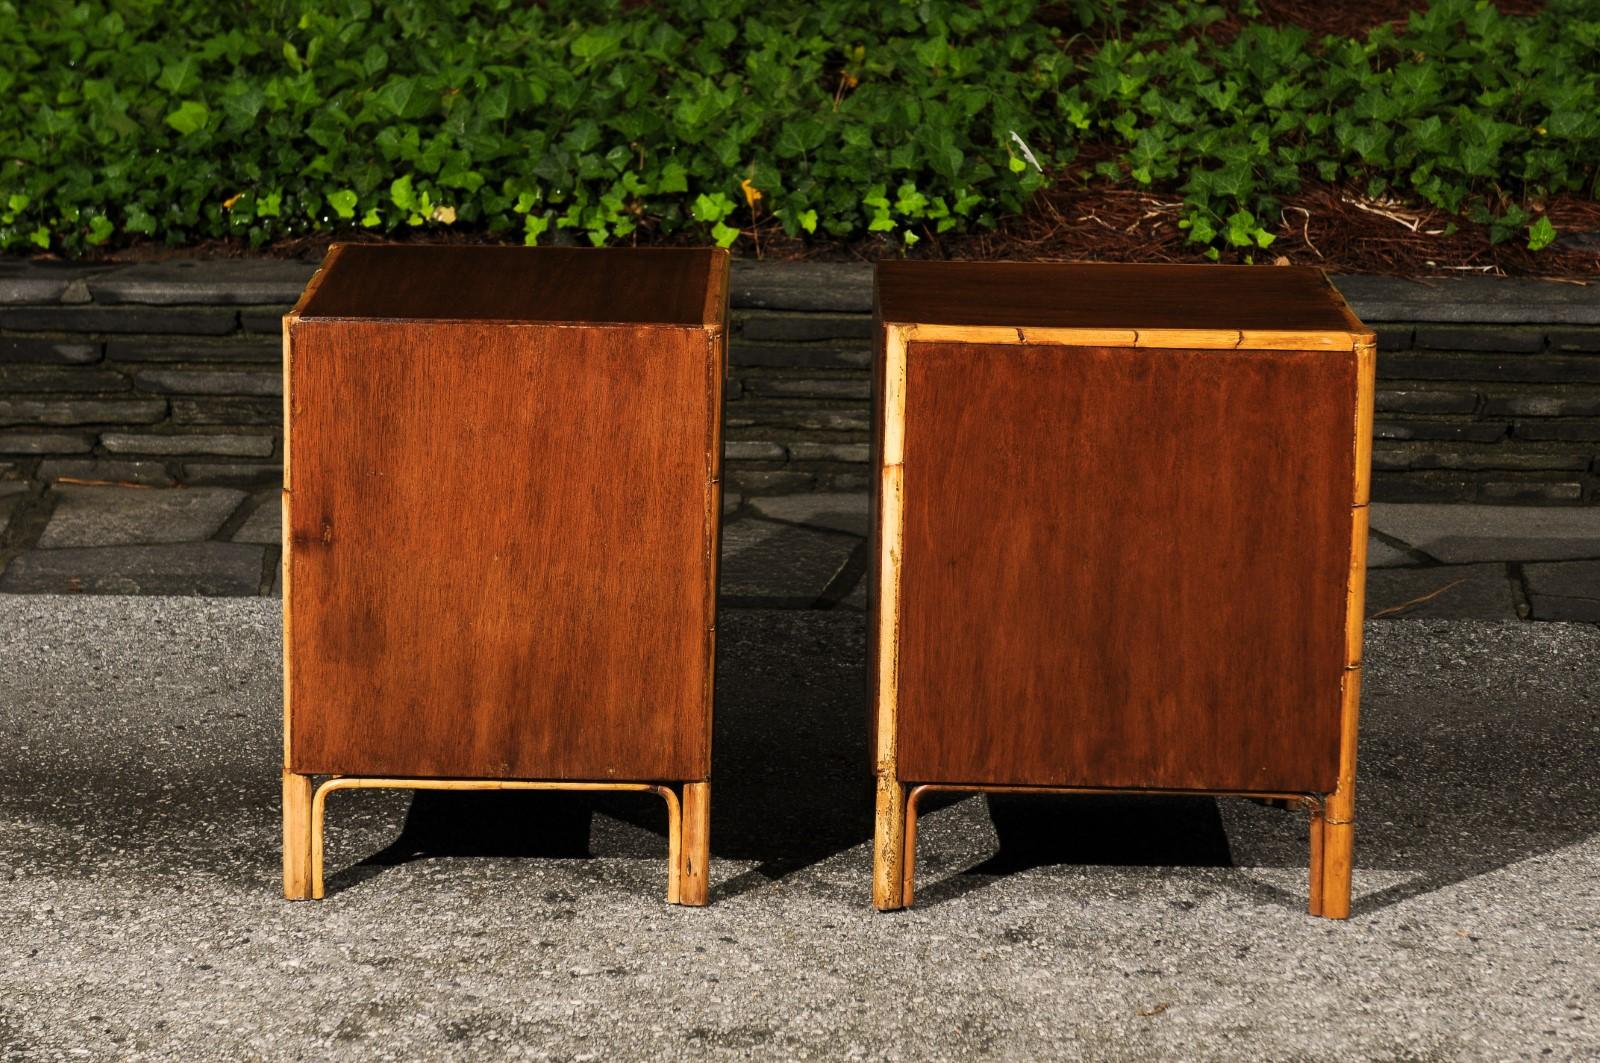 Magnificent Restored Mahogany and Rattan End Tables, Philippines, circa 1950 For Sale 3